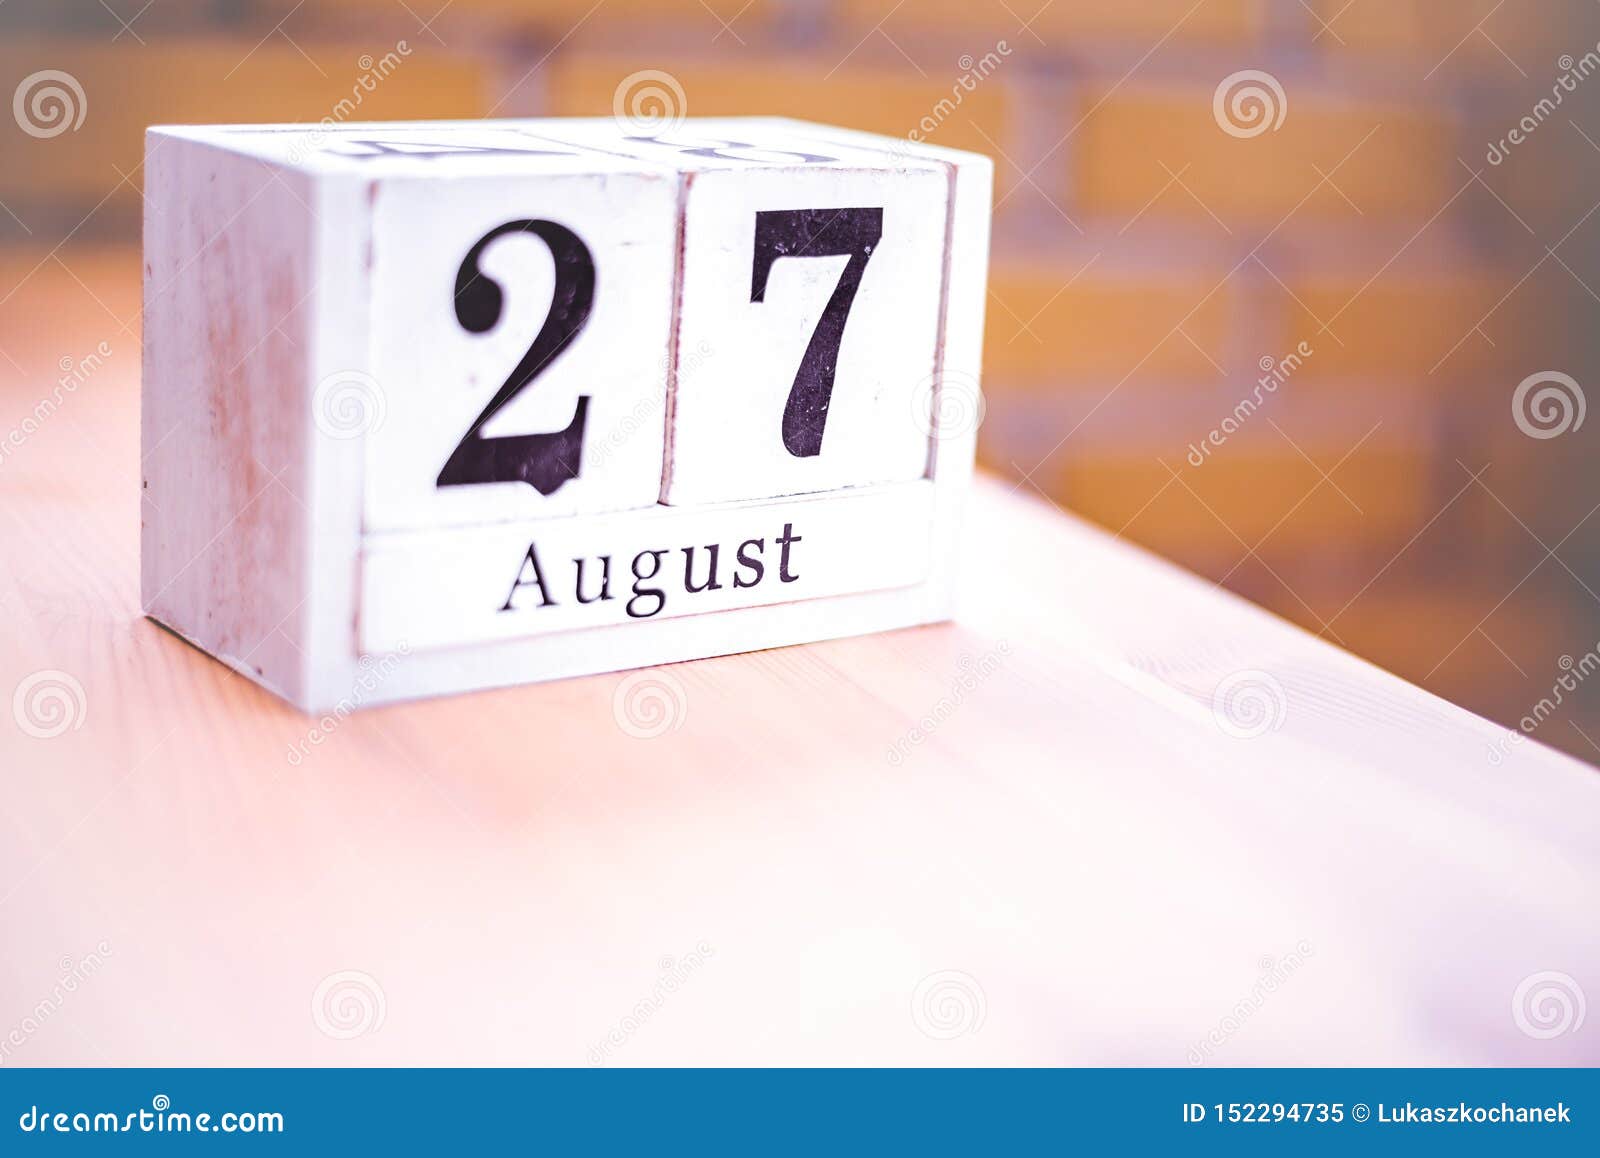 What is the sign for August 27th birthday?